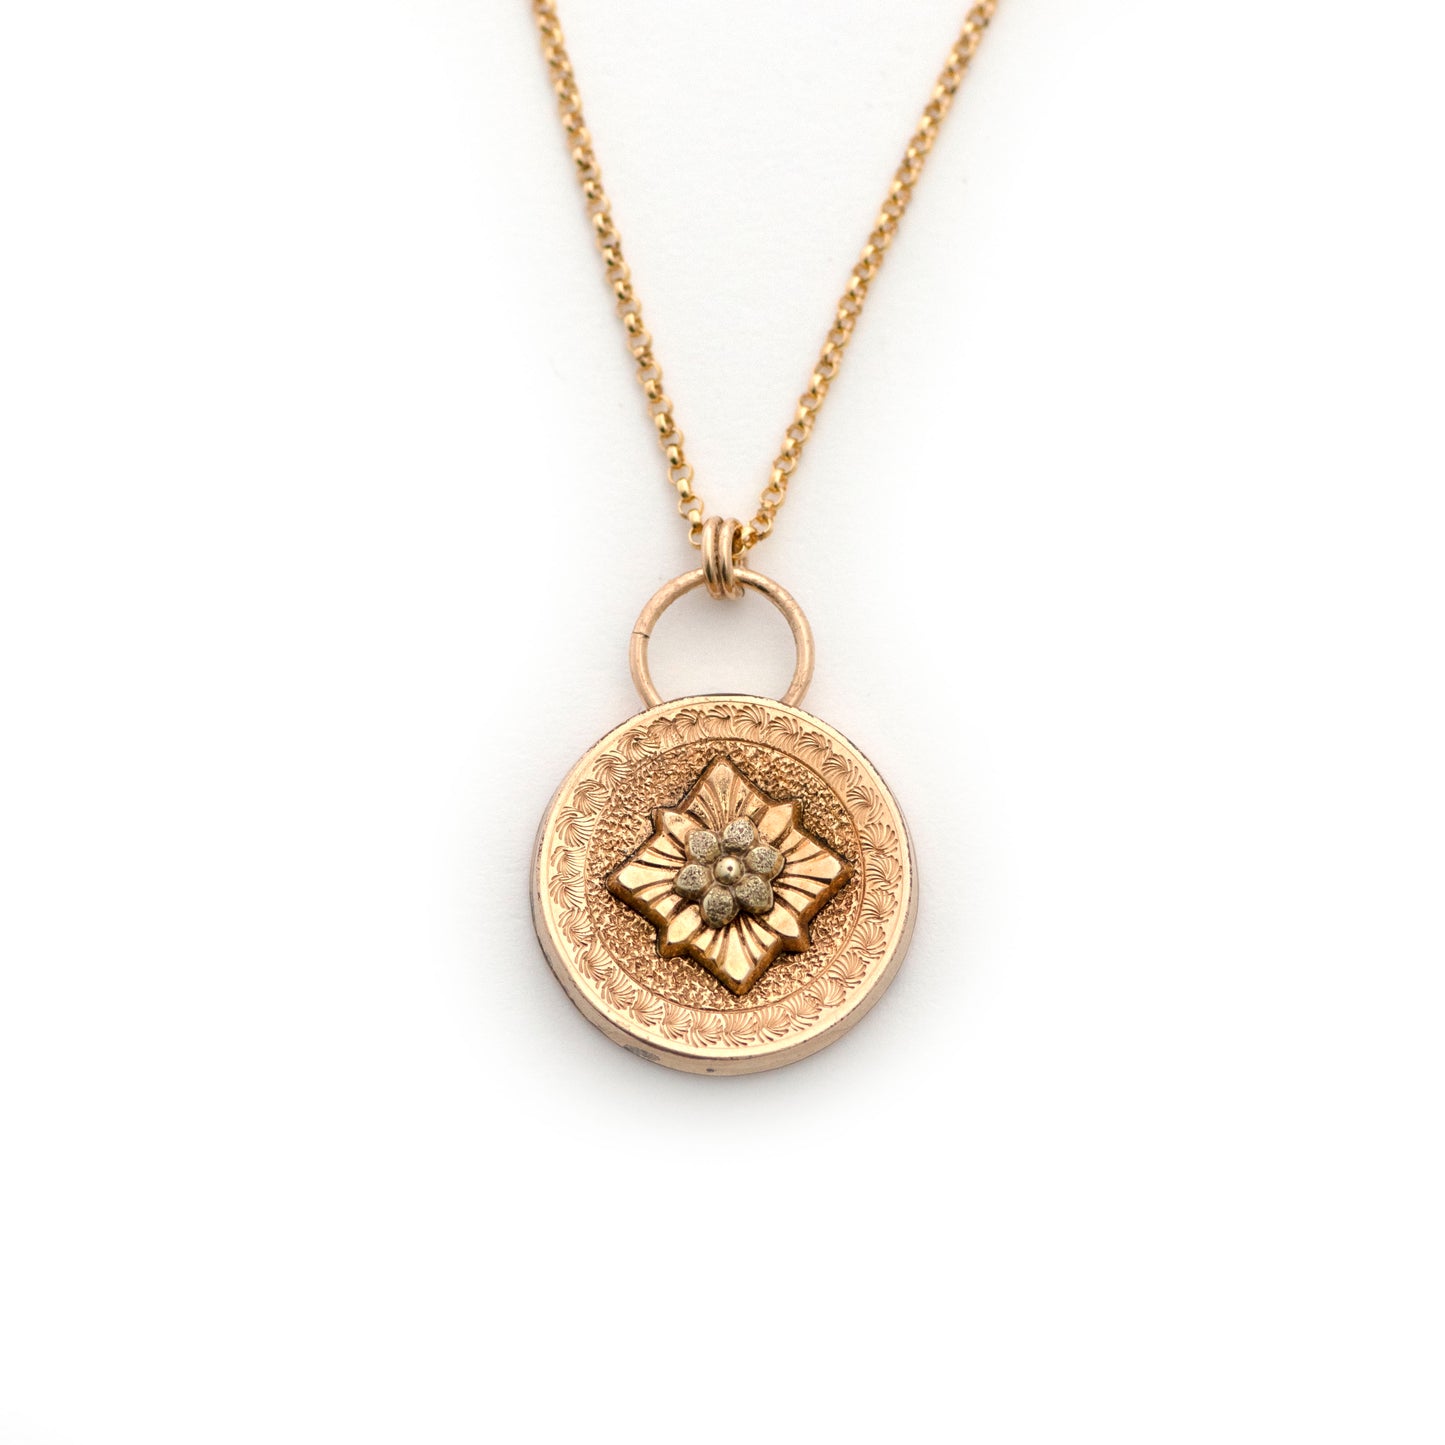 An antique cufflink conversion pendant resembling a door knocker shape that is strung on a 14k gold filled chain and laying on an all white background.